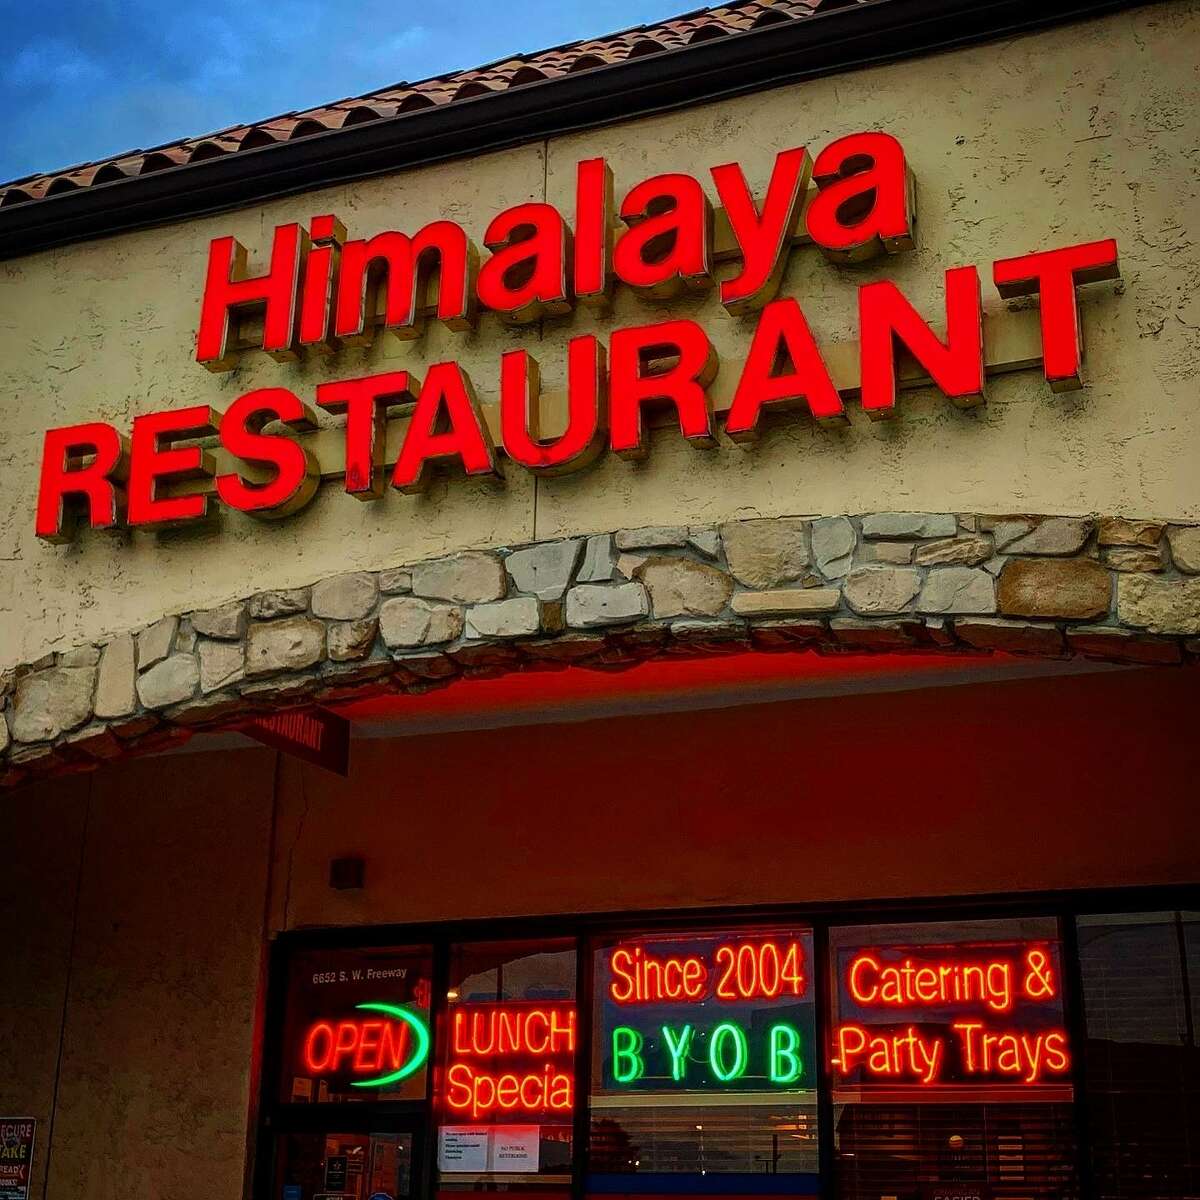 Himalaya is located in a strip center in Houston's Ghandi district.